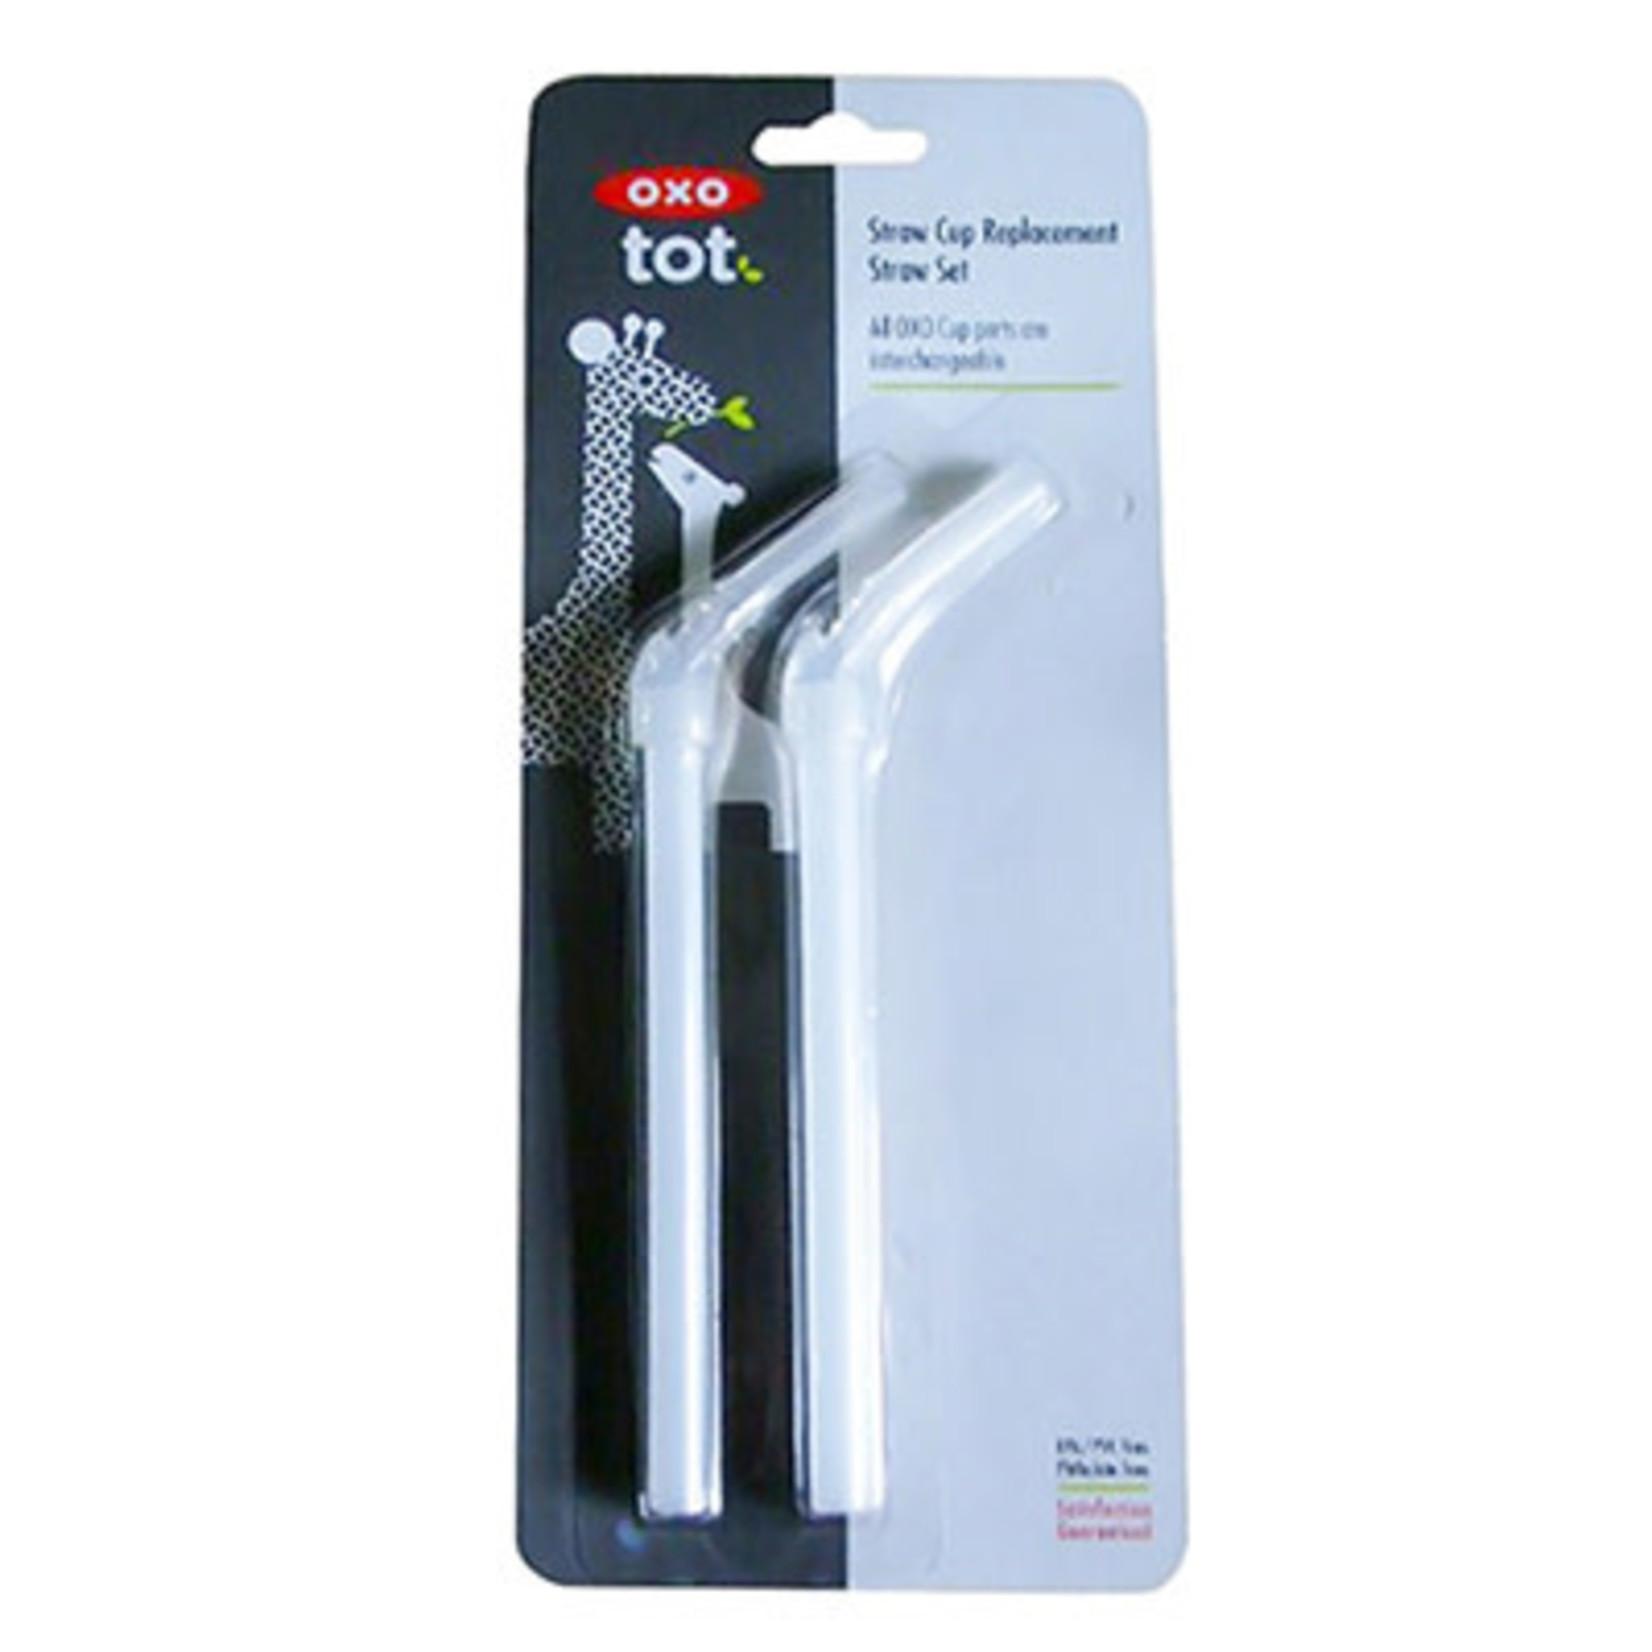 OXO Tot OXO TOT TRANSITION CUP REPLACEMENT STRAWS 2PK